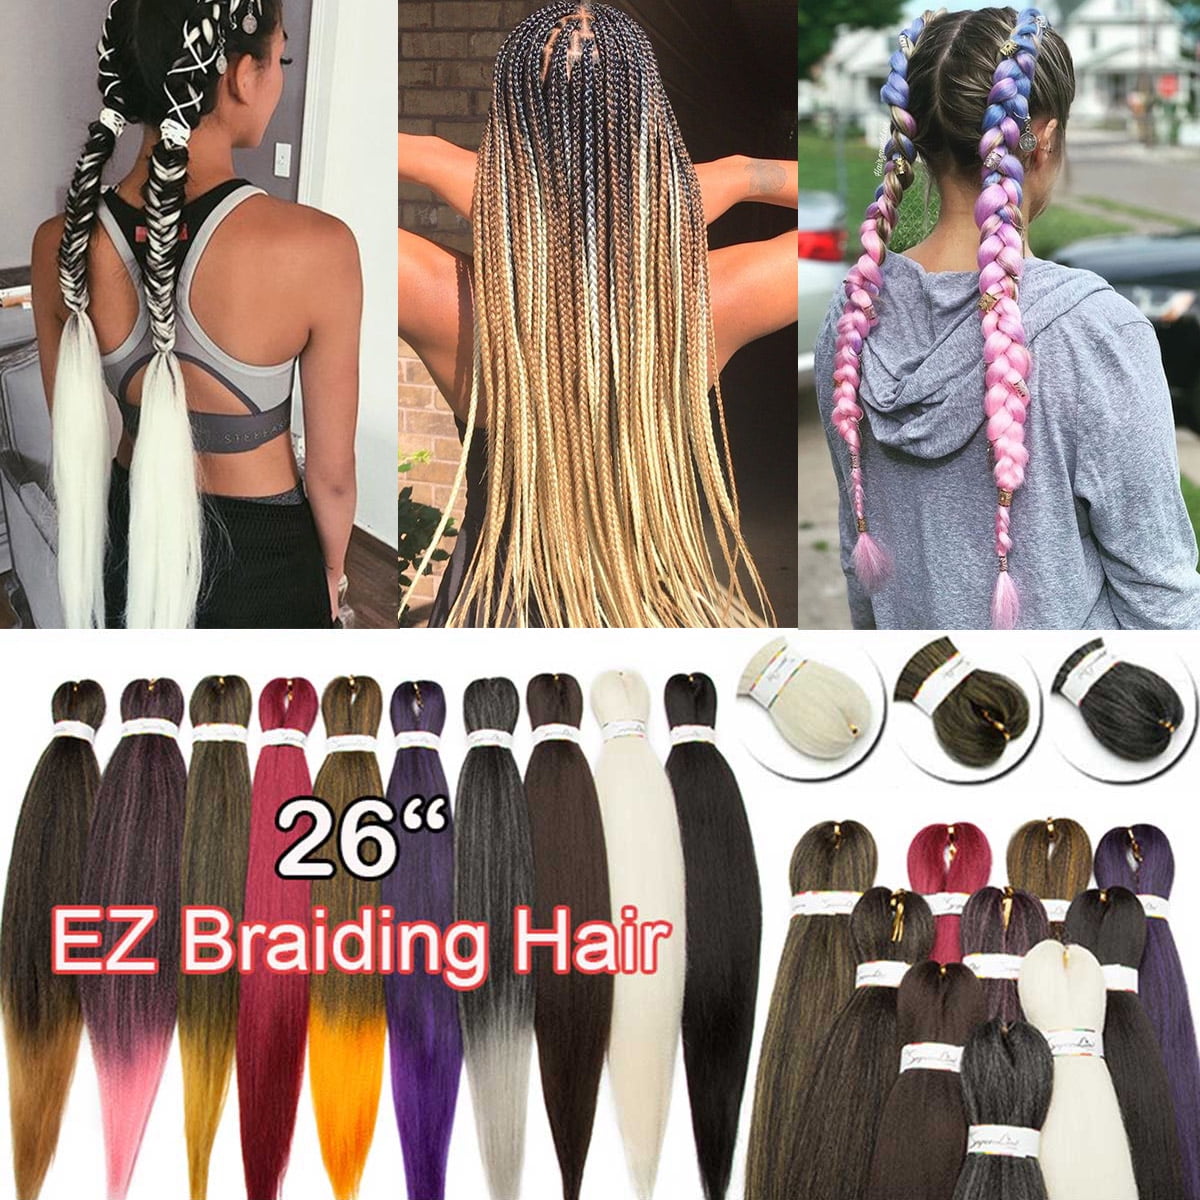 Natural ombré de braids Accessories Hair Accessories Hair Pins Synthetic braids extensions Dark brown to Blonde Ombré Braids Synthetic Double ended smooth braids 